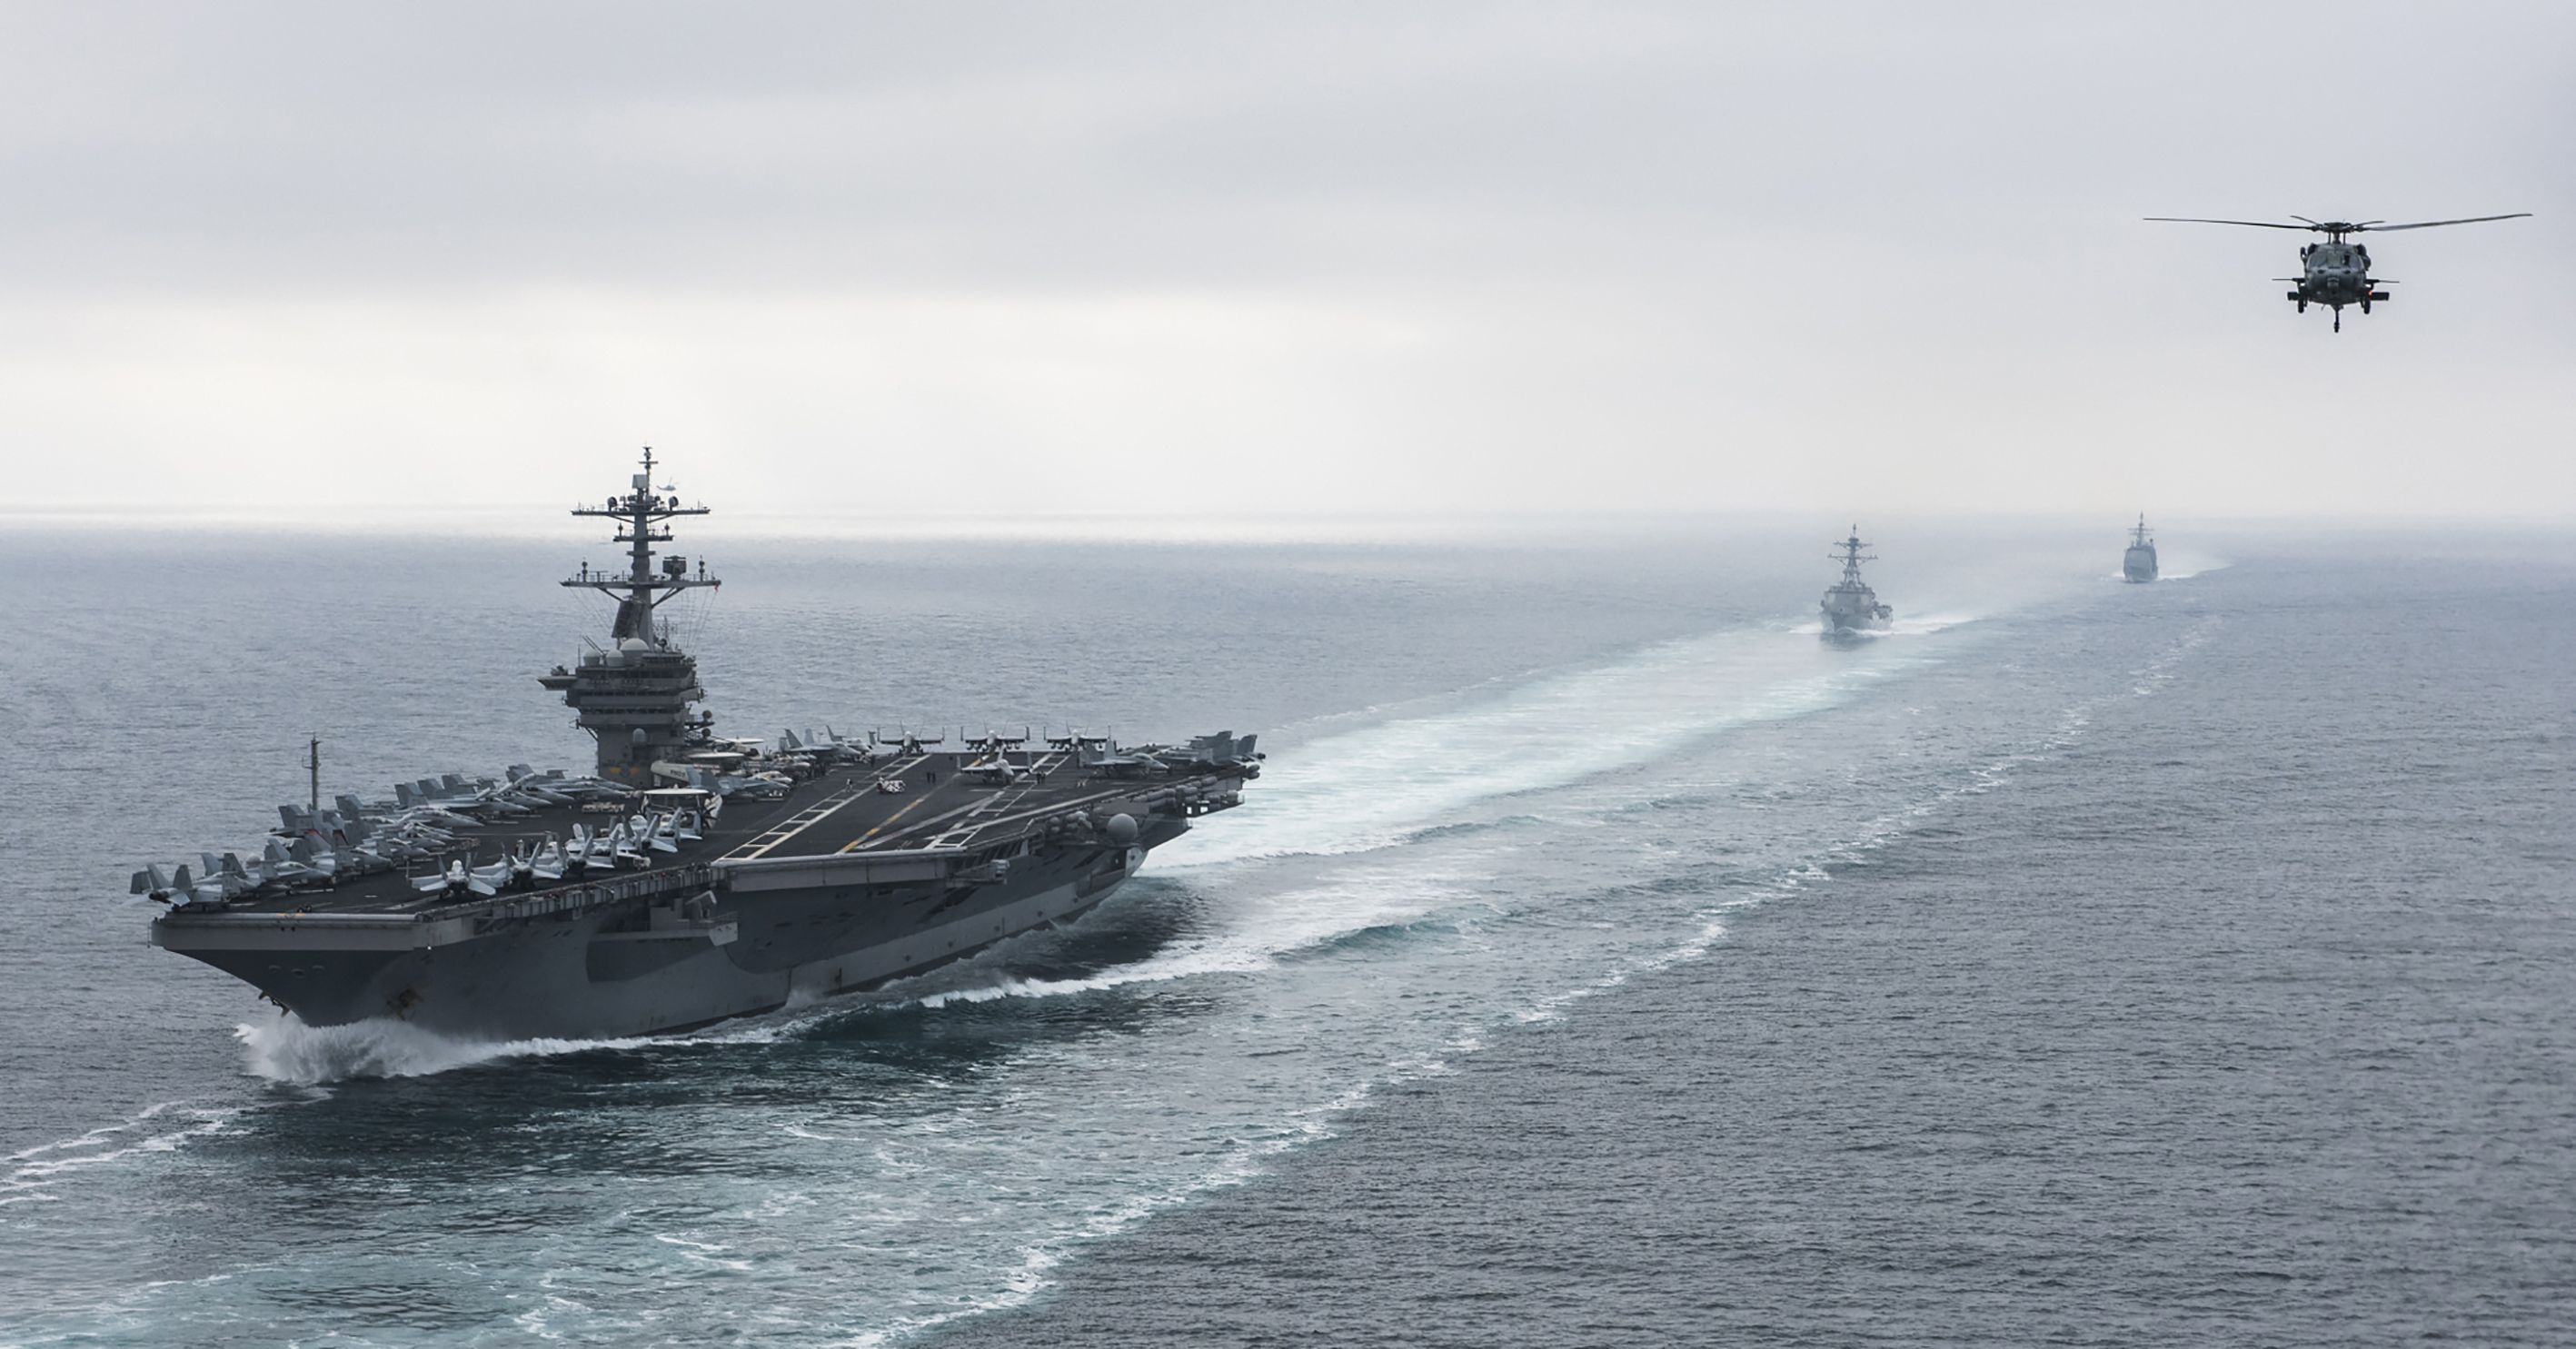 This US Navy handout photo obtained August 15, 2017 shows The aircraft carrier USS Theodore Roosevelt (CVN 71), the guided-missile destroyer USS Halsey (DDG 97), and the guided-missile cruiser USS Bunker Hill (CG 52) underway in formation during a strait transit show of force exercise on August 11, 2017 in the Pacific Ocean. (Photo/AFP)